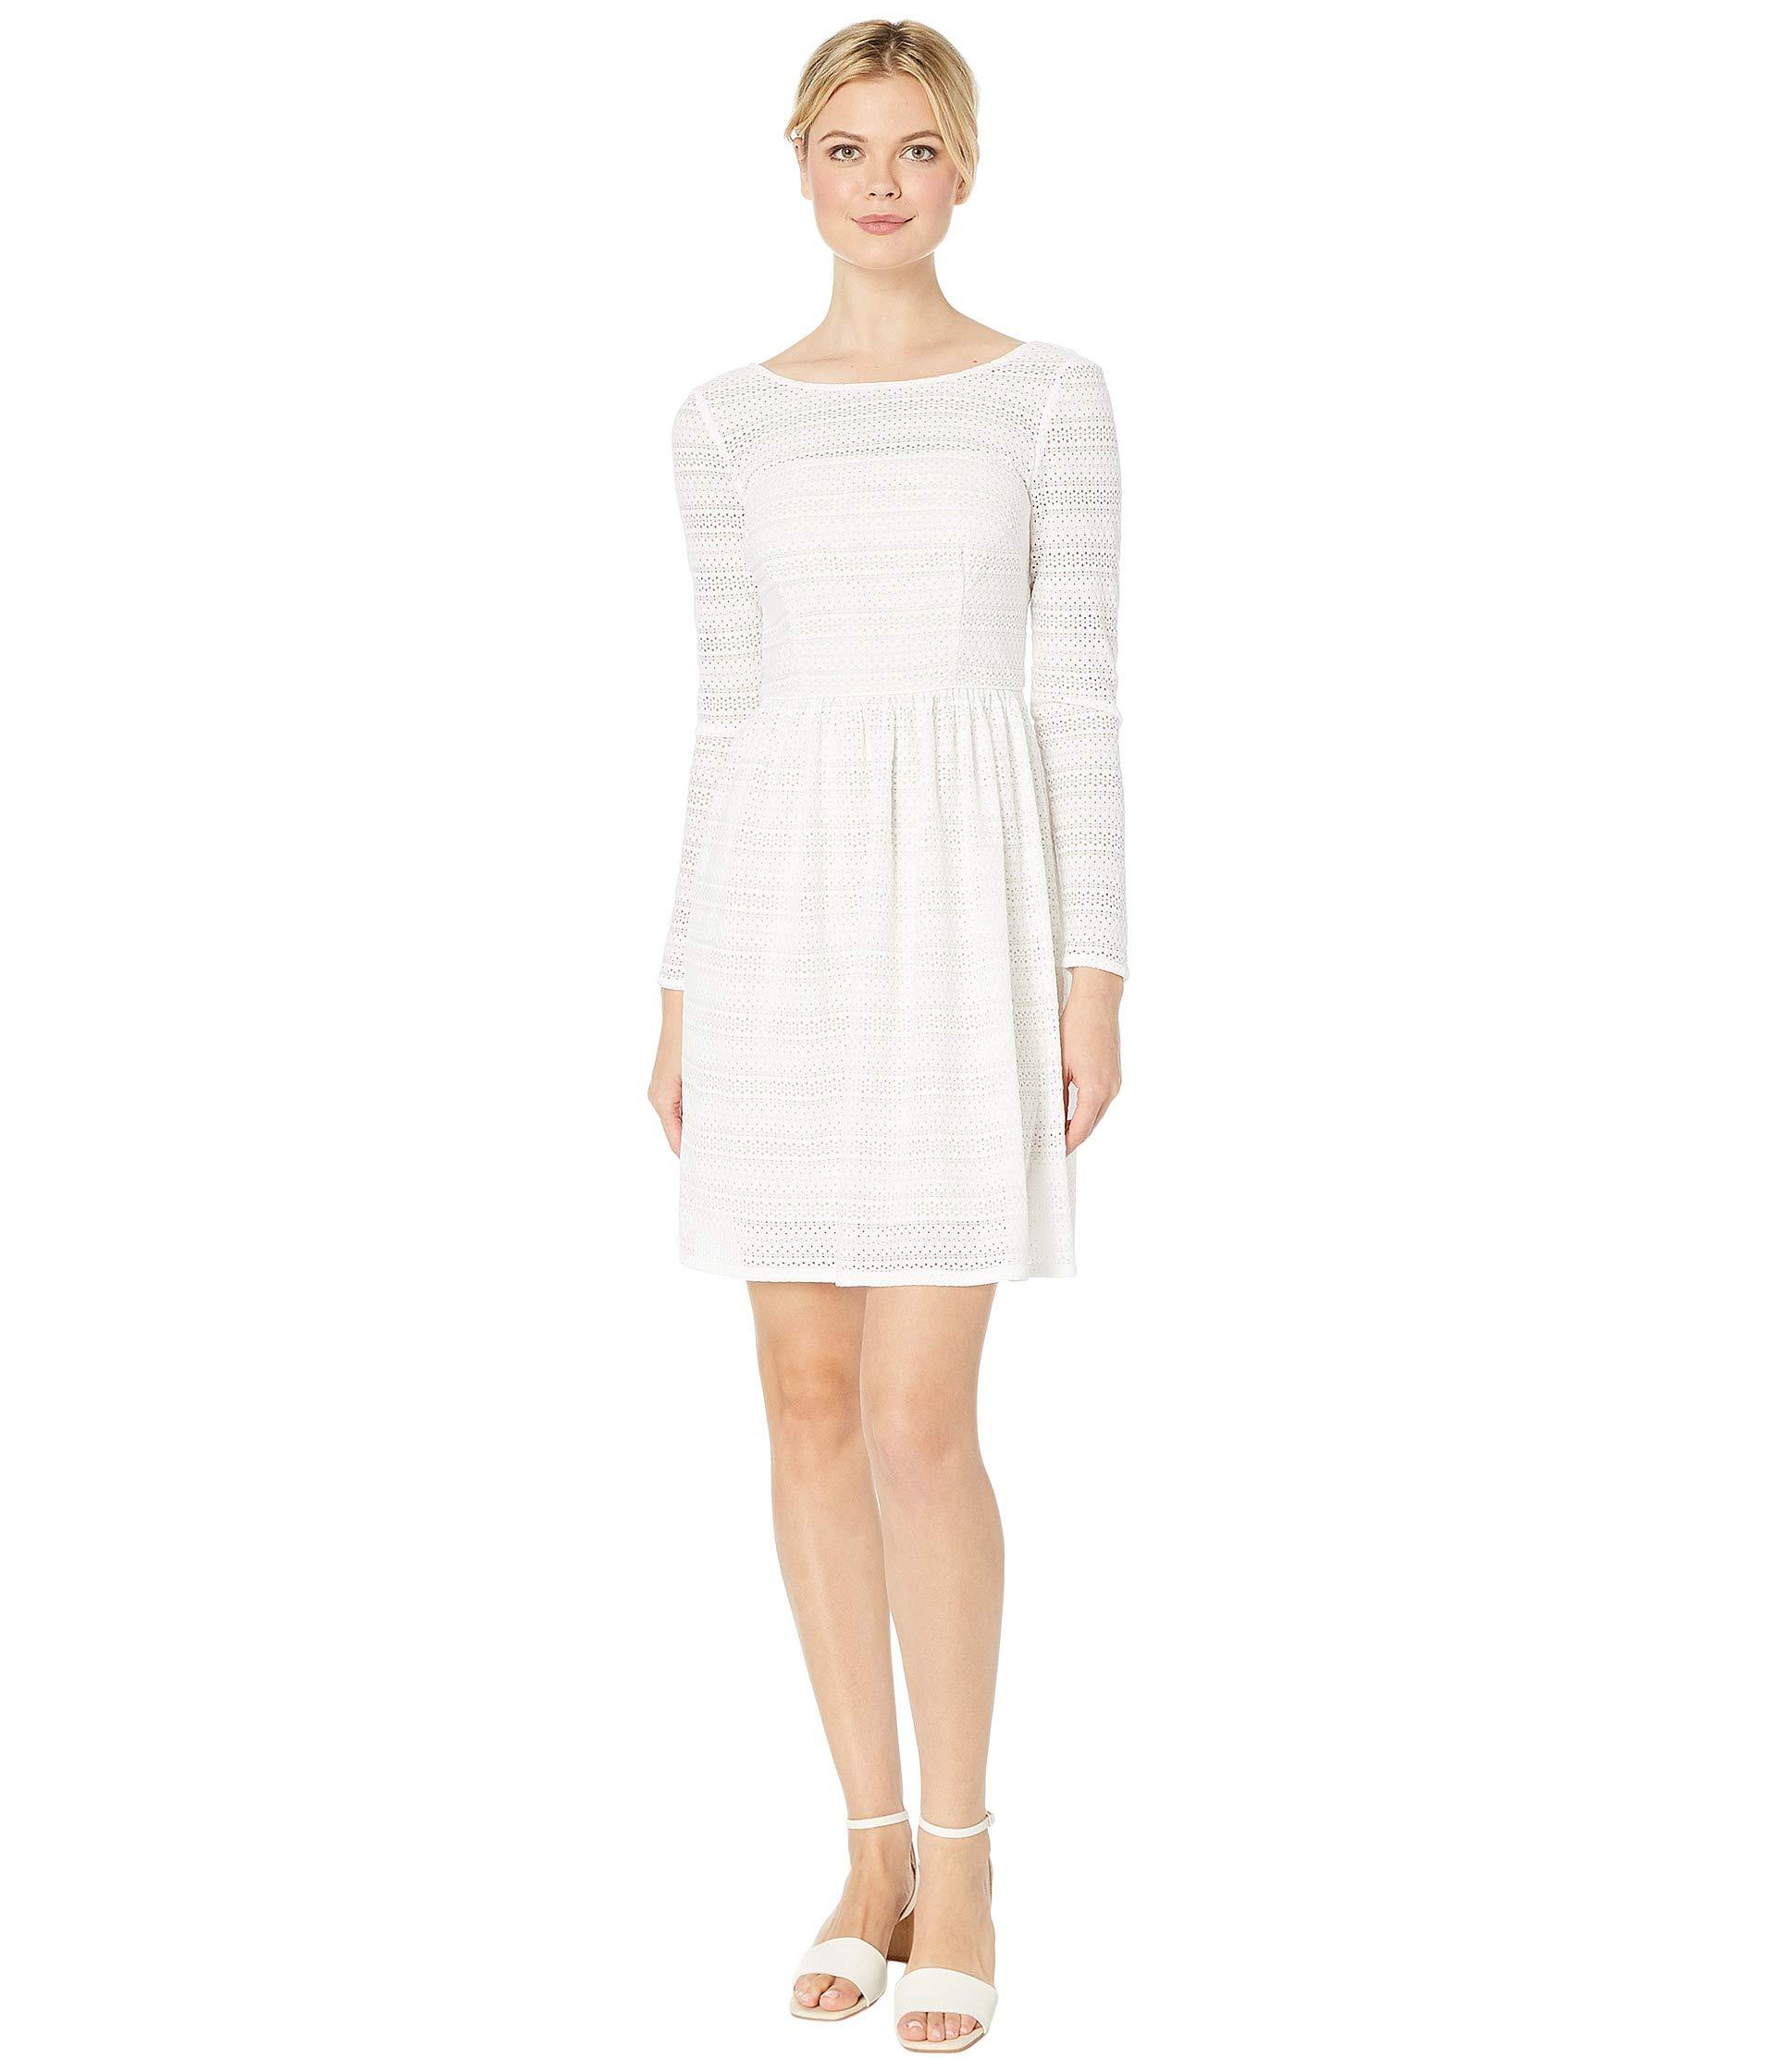 Adrianna Papell Long Sleeve Lace Fit Flare Dress in White - Lyst